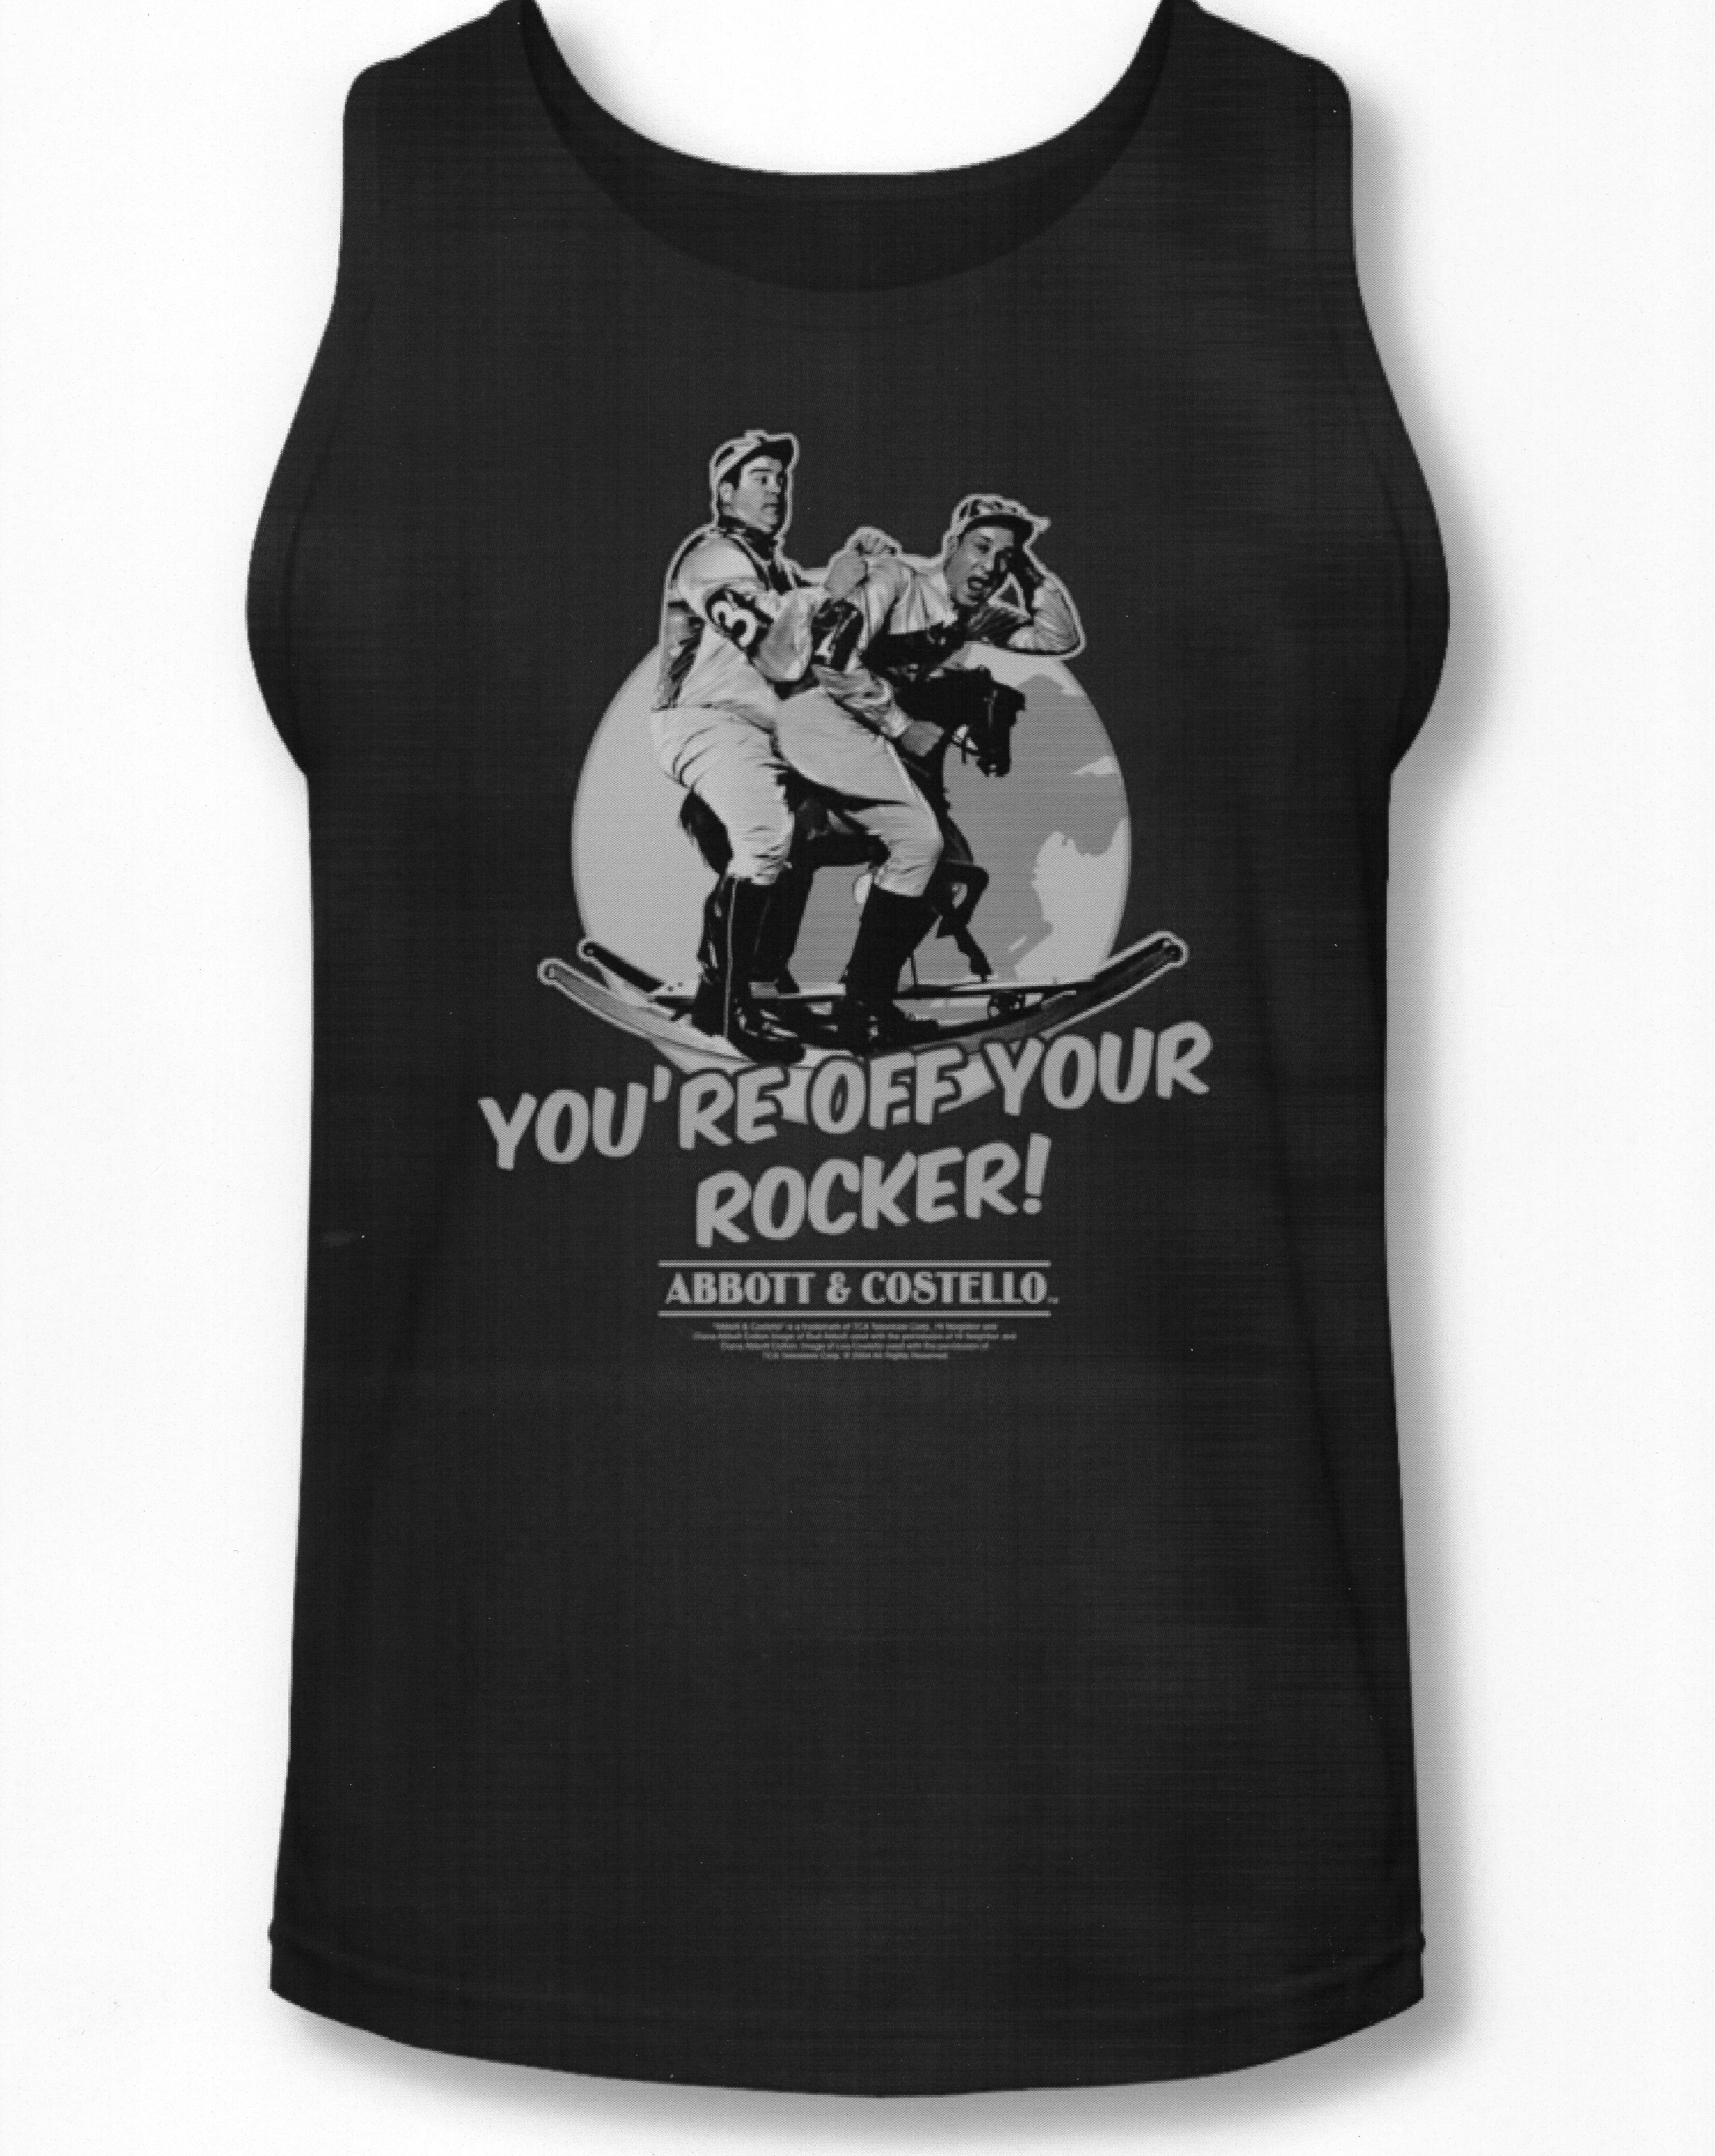 You're Off Your Rocker! Tank Top